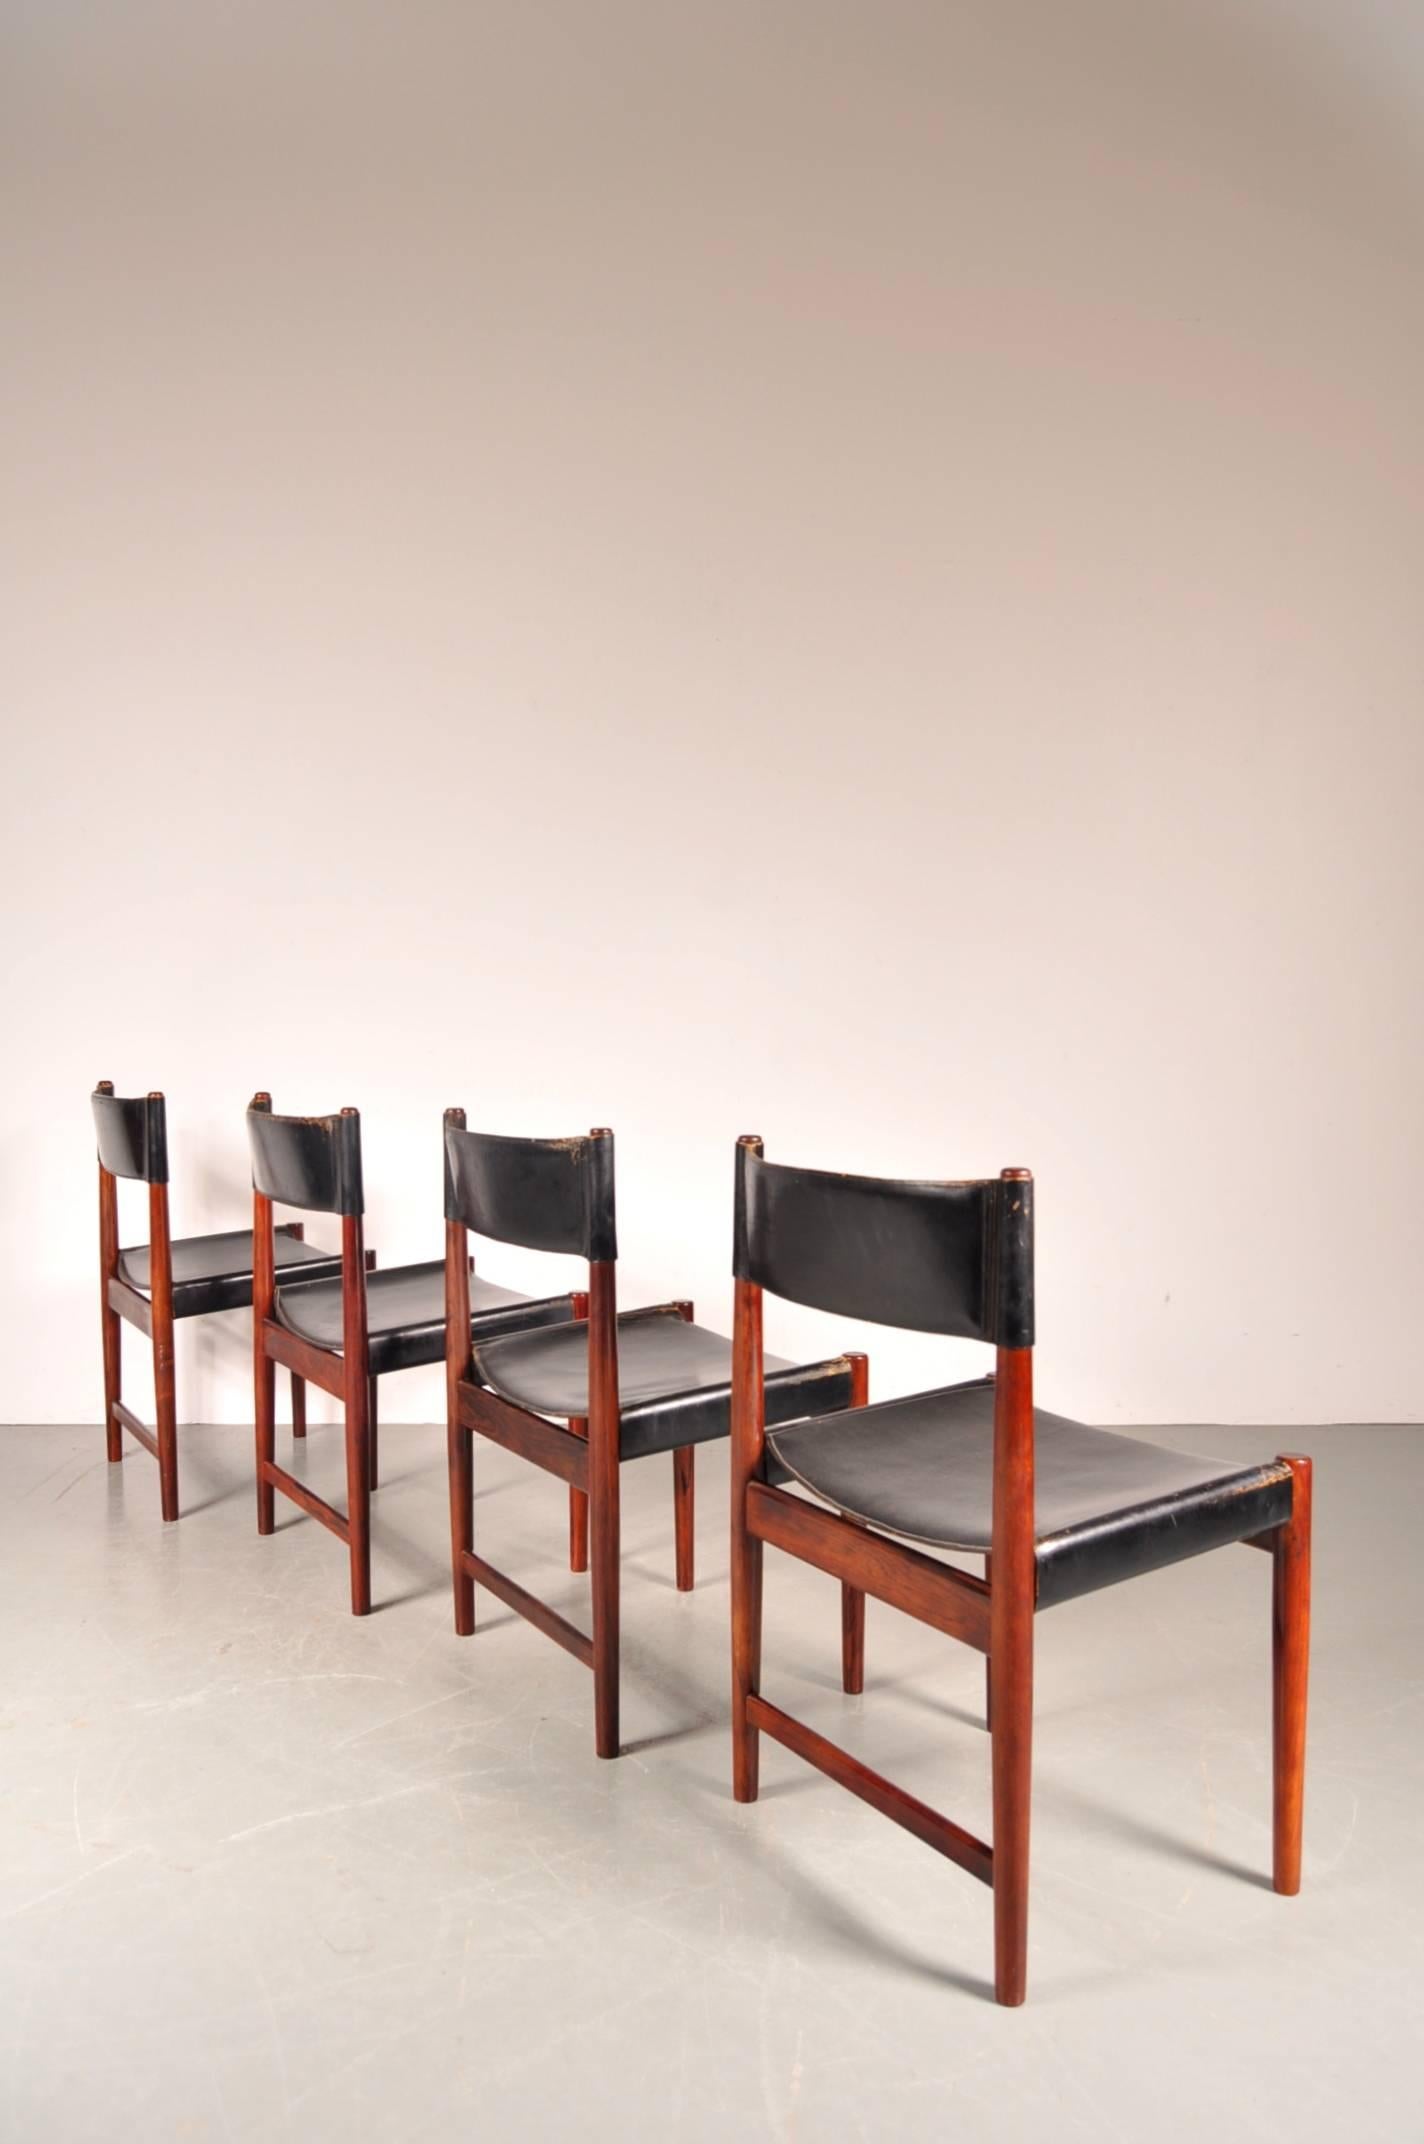 Very rare set of four dining chairs designed by Arne Vodder, manufactured by Sibast in Denmark, circa 1950. 

These eye-catching chairs are made of thick black saddle leather on a beautiful quality rosewood base. They are a rare find, and